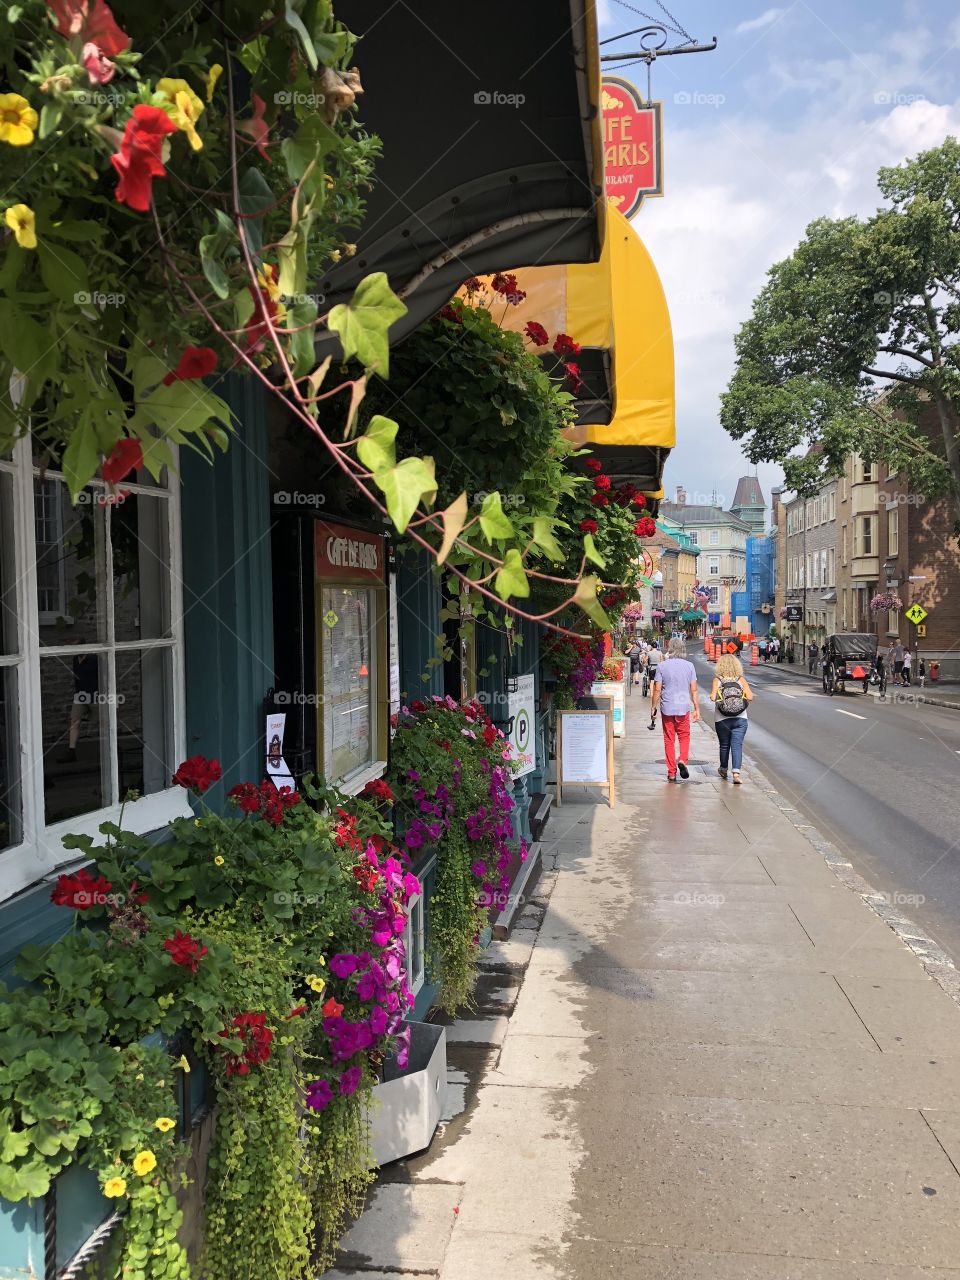 My first day in the city of Quebec 🥰